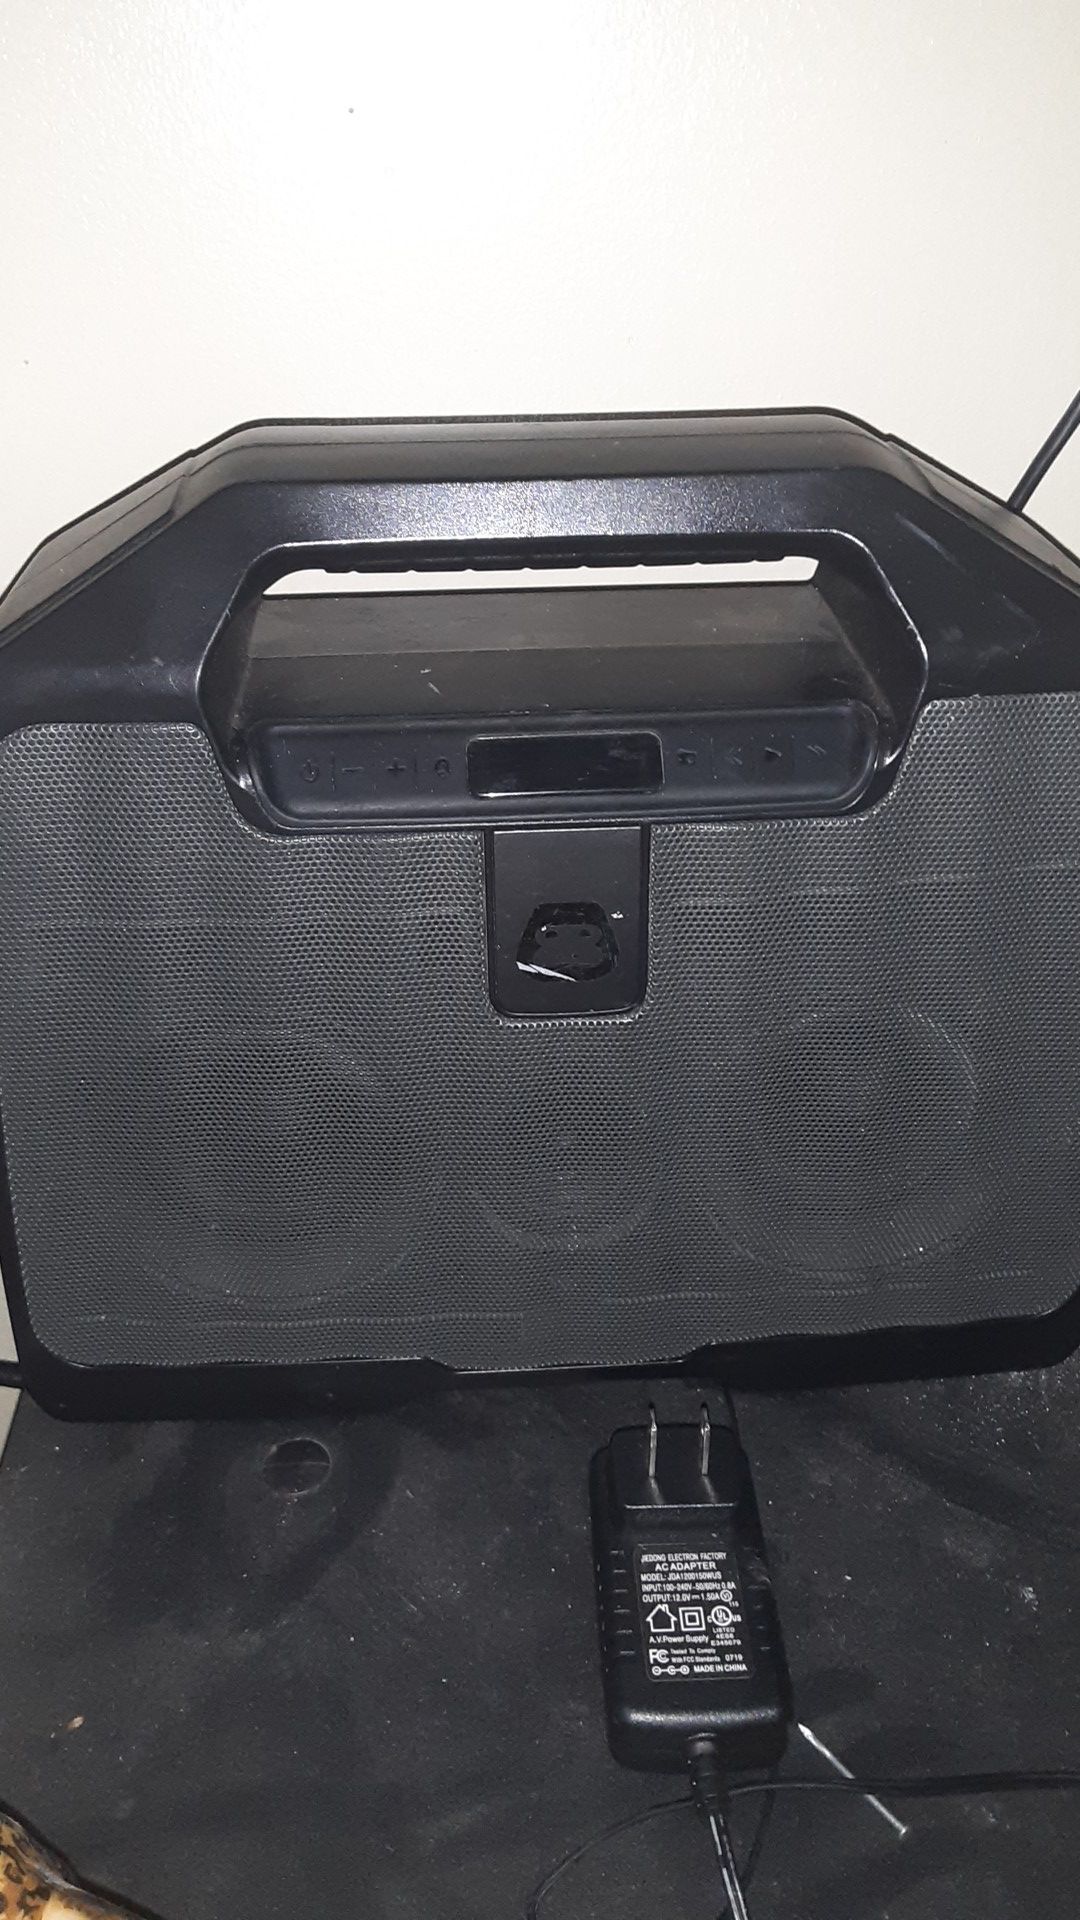 Bluetooth or direct wire speaker